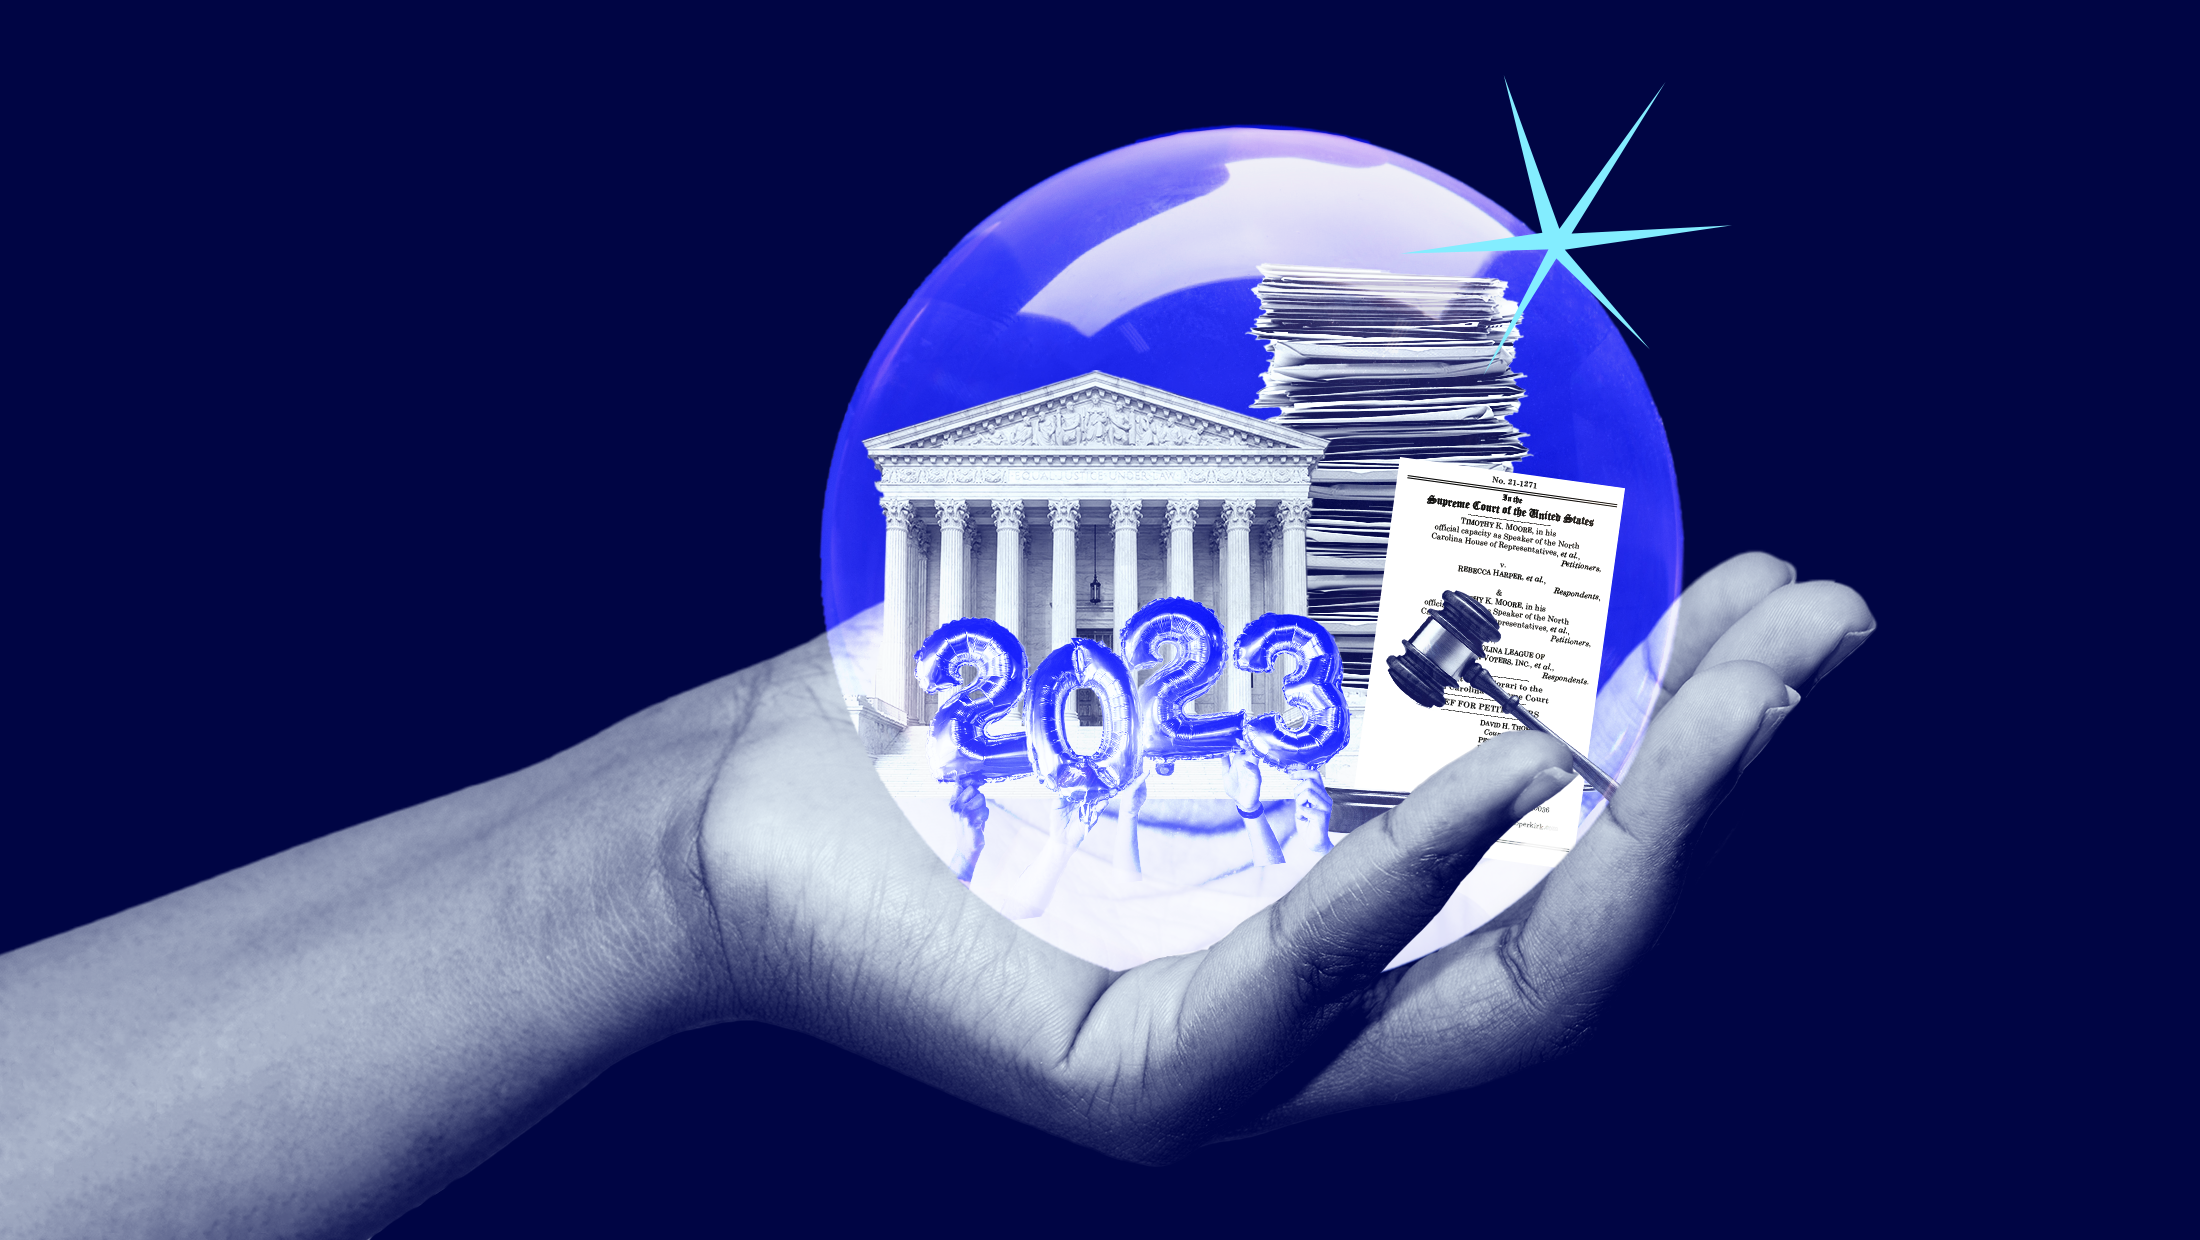 A dark blue background with a hand holding a crystal ball revealing the U.S. Supreme Court build, a stack of files, a Supreme Court opinion, gavel and 2023 balloons.